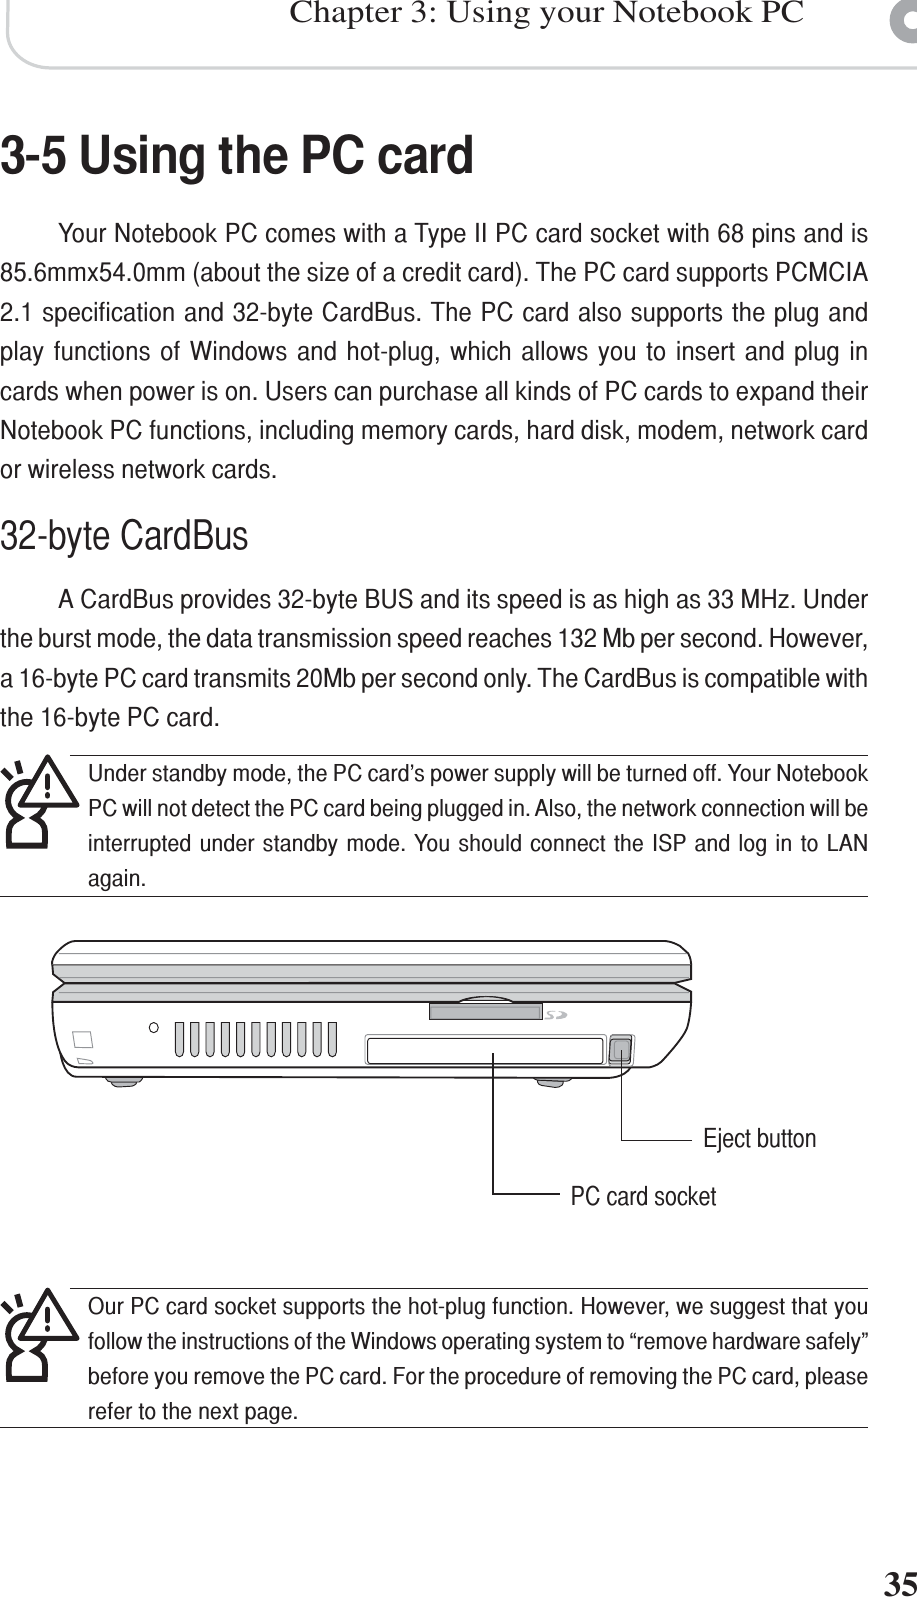 35Chapter 3: Using your Notebook PC3-5 Using the PC cardYour Notebook PC comes with a Type II PC card socket with 68 pins and is85.6mmx54.0mm (about the size of a credit card). The PC card supports PCMCIA2.1 specification and 32-byte CardBus. The PC card also supports the plug andplay functions of Windows and hot-plug, which allows you to insert and plug incards when power is on. Users can purchase all kinds of PC cards to expand theirNotebook PC functions, including memory cards, hard disk, modem, network cardor wireless network cards.32-byte CardBusA CardBus provides 32-byte BUS and its speed is as high as 33 MHz. Underthe burst mode, the data transmission speed reaches 132 Mb per second. However,a 16-byte PC card transmits 20Mb per second only. The CardBus is compatible withthe 16-byte PC card.PC card socketEject buttonOur PC card socket supports the hot-plug function. However, we suggest that youfollow the instructions of the Windows operating system to “remove hardware safely”before you remove the PC card. For the procedure of removing the PC card, pleaserefer to the next page.Under standby mode, the PC card’s power supply will be turned off. Your NotebookPC will not detect the PC card being plugged in. Also, the network connection will beinterrupted under standby mode. You should connect the ISP and log in to LANagain.